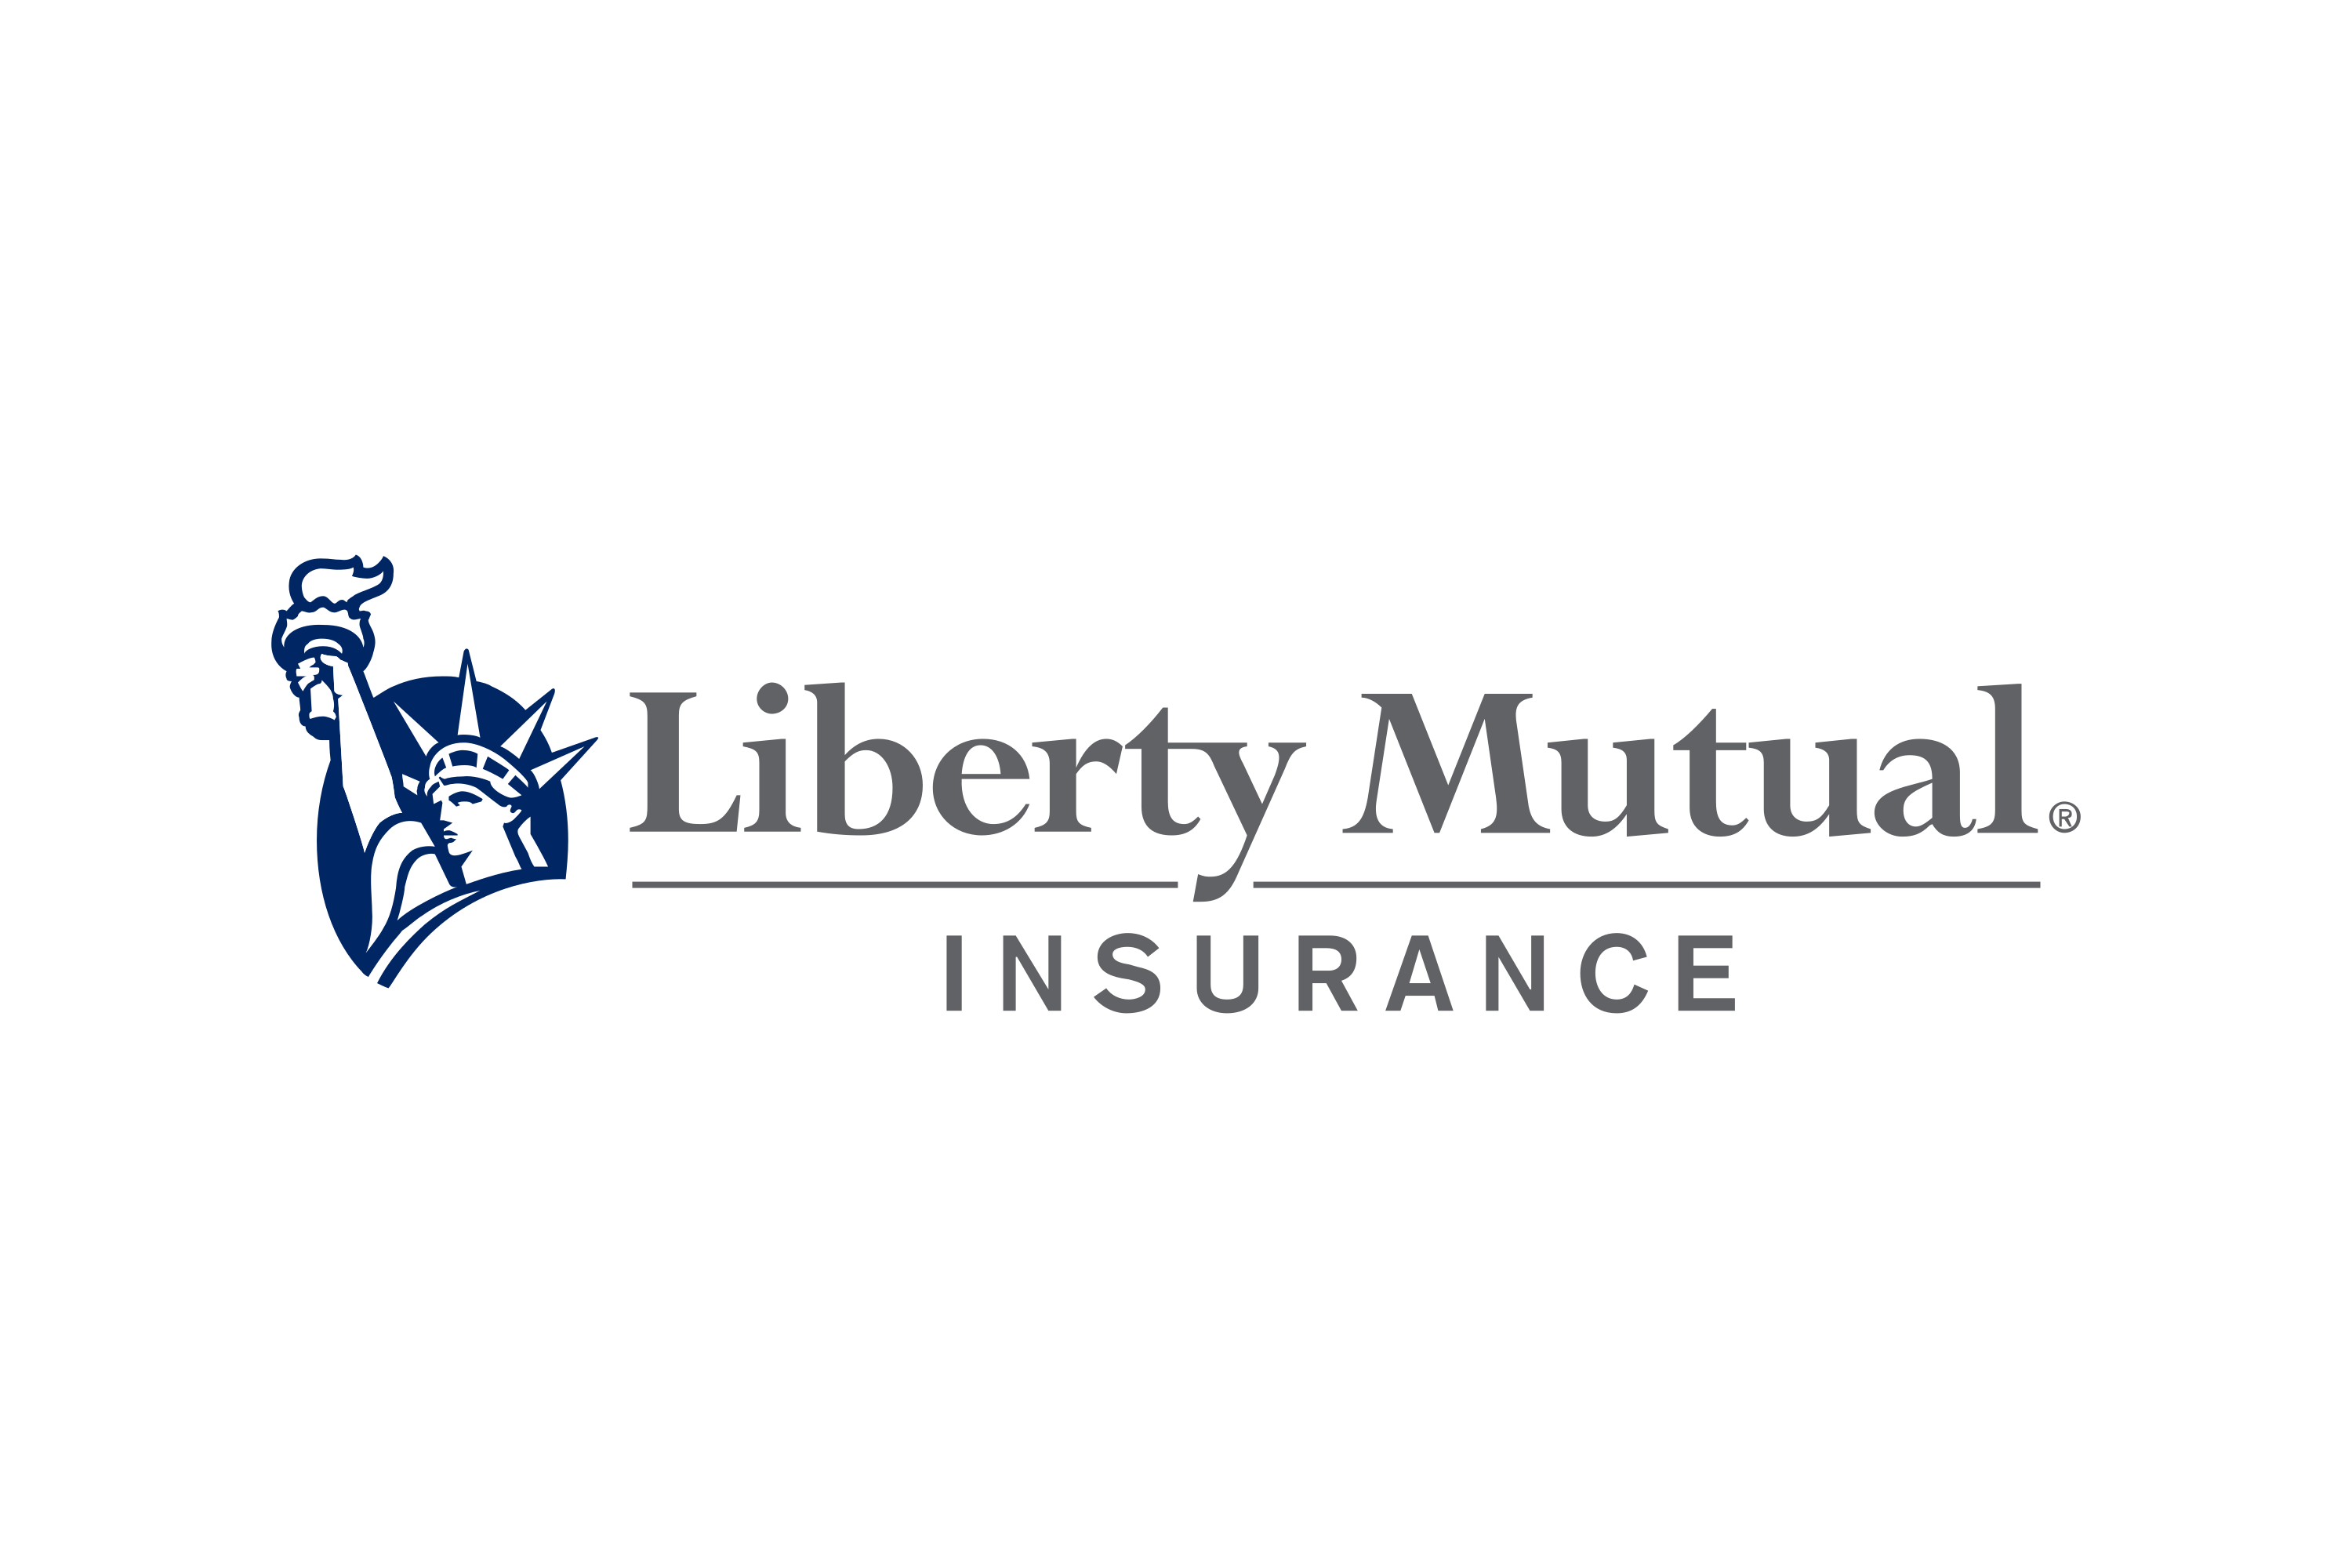 Download Liberty Mutual Logo in SVG Vector or PNG File Format - Logo.wine